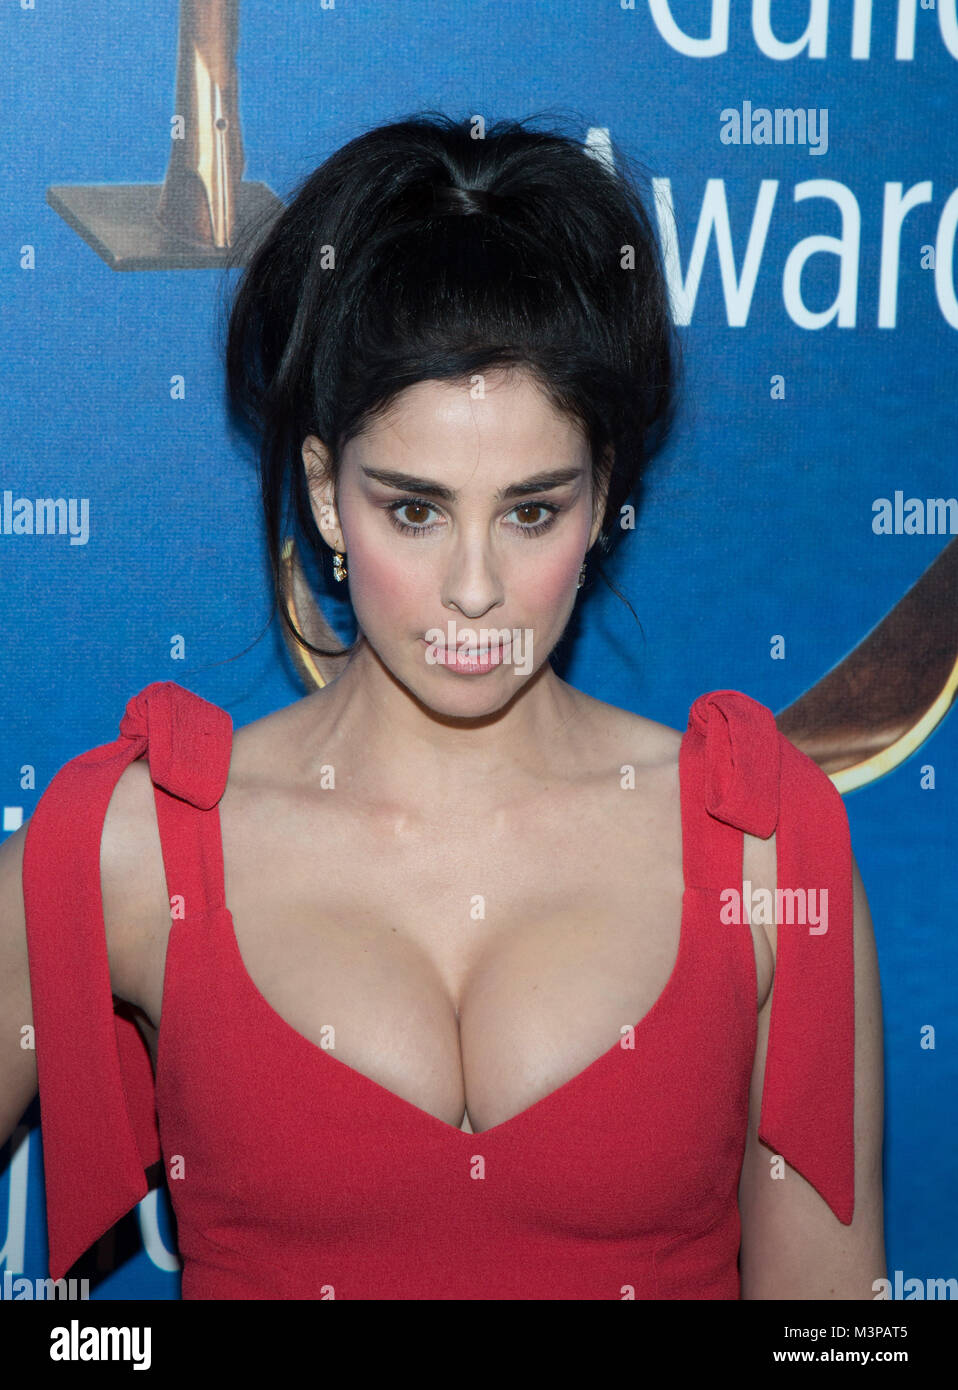 Beverly Hills, USA. 11th Feb, 2018. Sarah Silverman attends the 2018 Writers Guild Awards L.A. Ceremony at The Beverly Hilton Hotel on February 11, 2018 in Beverly Hills, California. Credit: The Photo Access/Alamy Live News Stock Photo